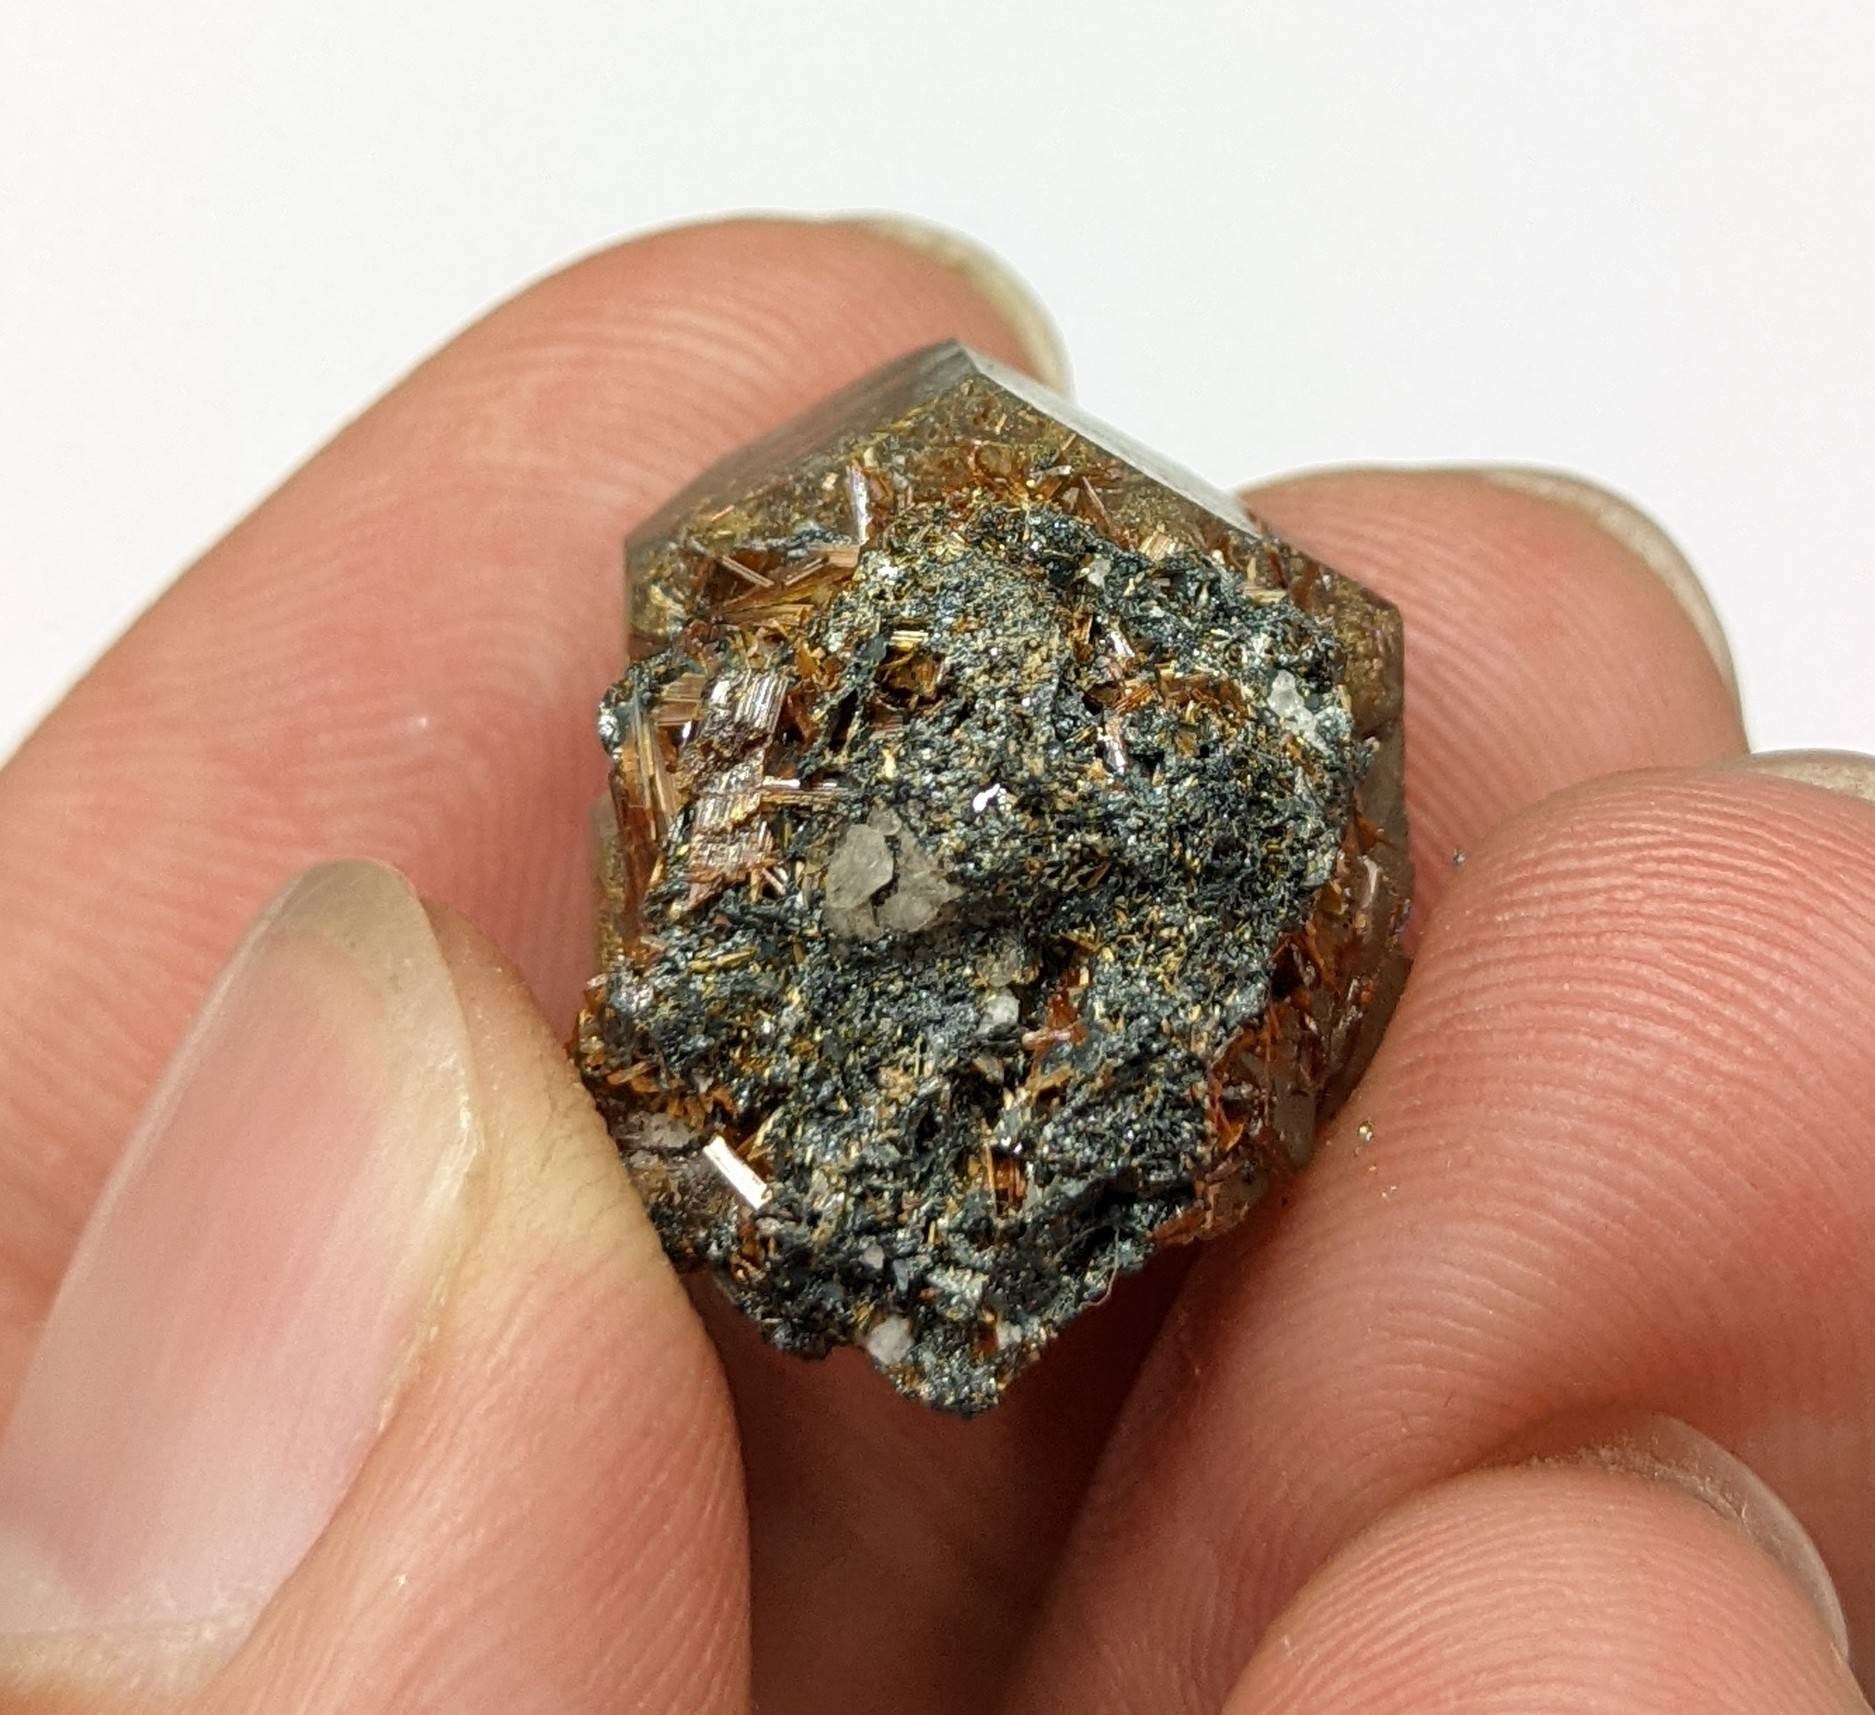 ARSAA GEMS AND MINERALSSagenite var Rutile included quartz crystal from KP Pakistan, 6.4 grams - Premium  from ARSAA GEMS AND MINERALS - Just $25.00! Shop now at ARSAA GEMS AND MINERALS